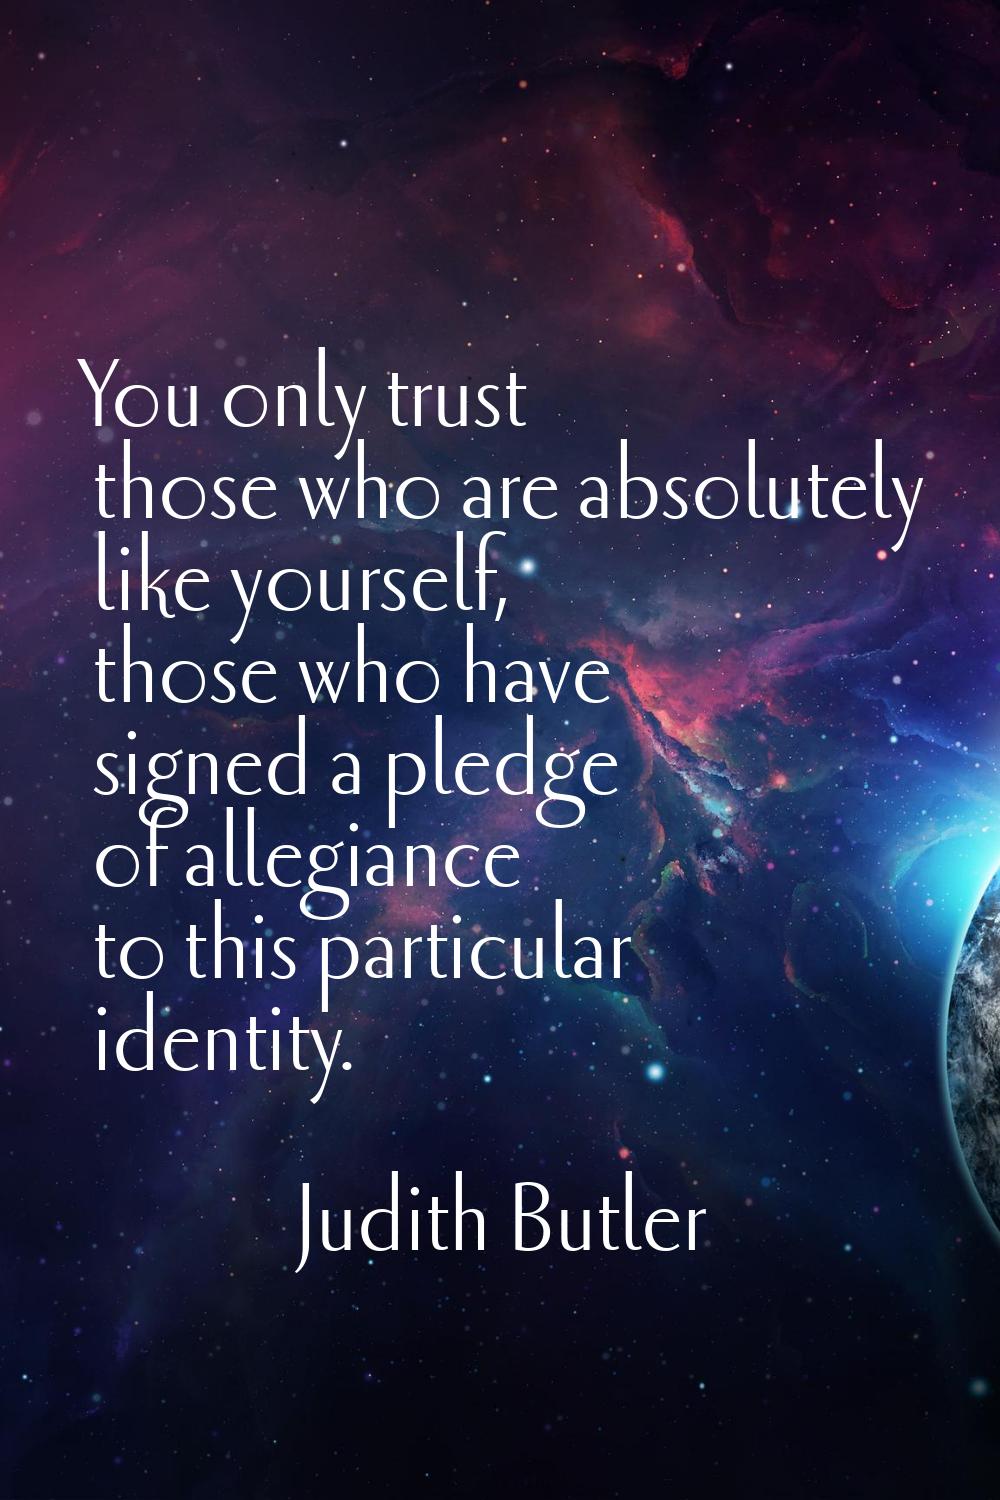 You only trust those who are absolutely like yourself, those who have signed a pledge of allegiance